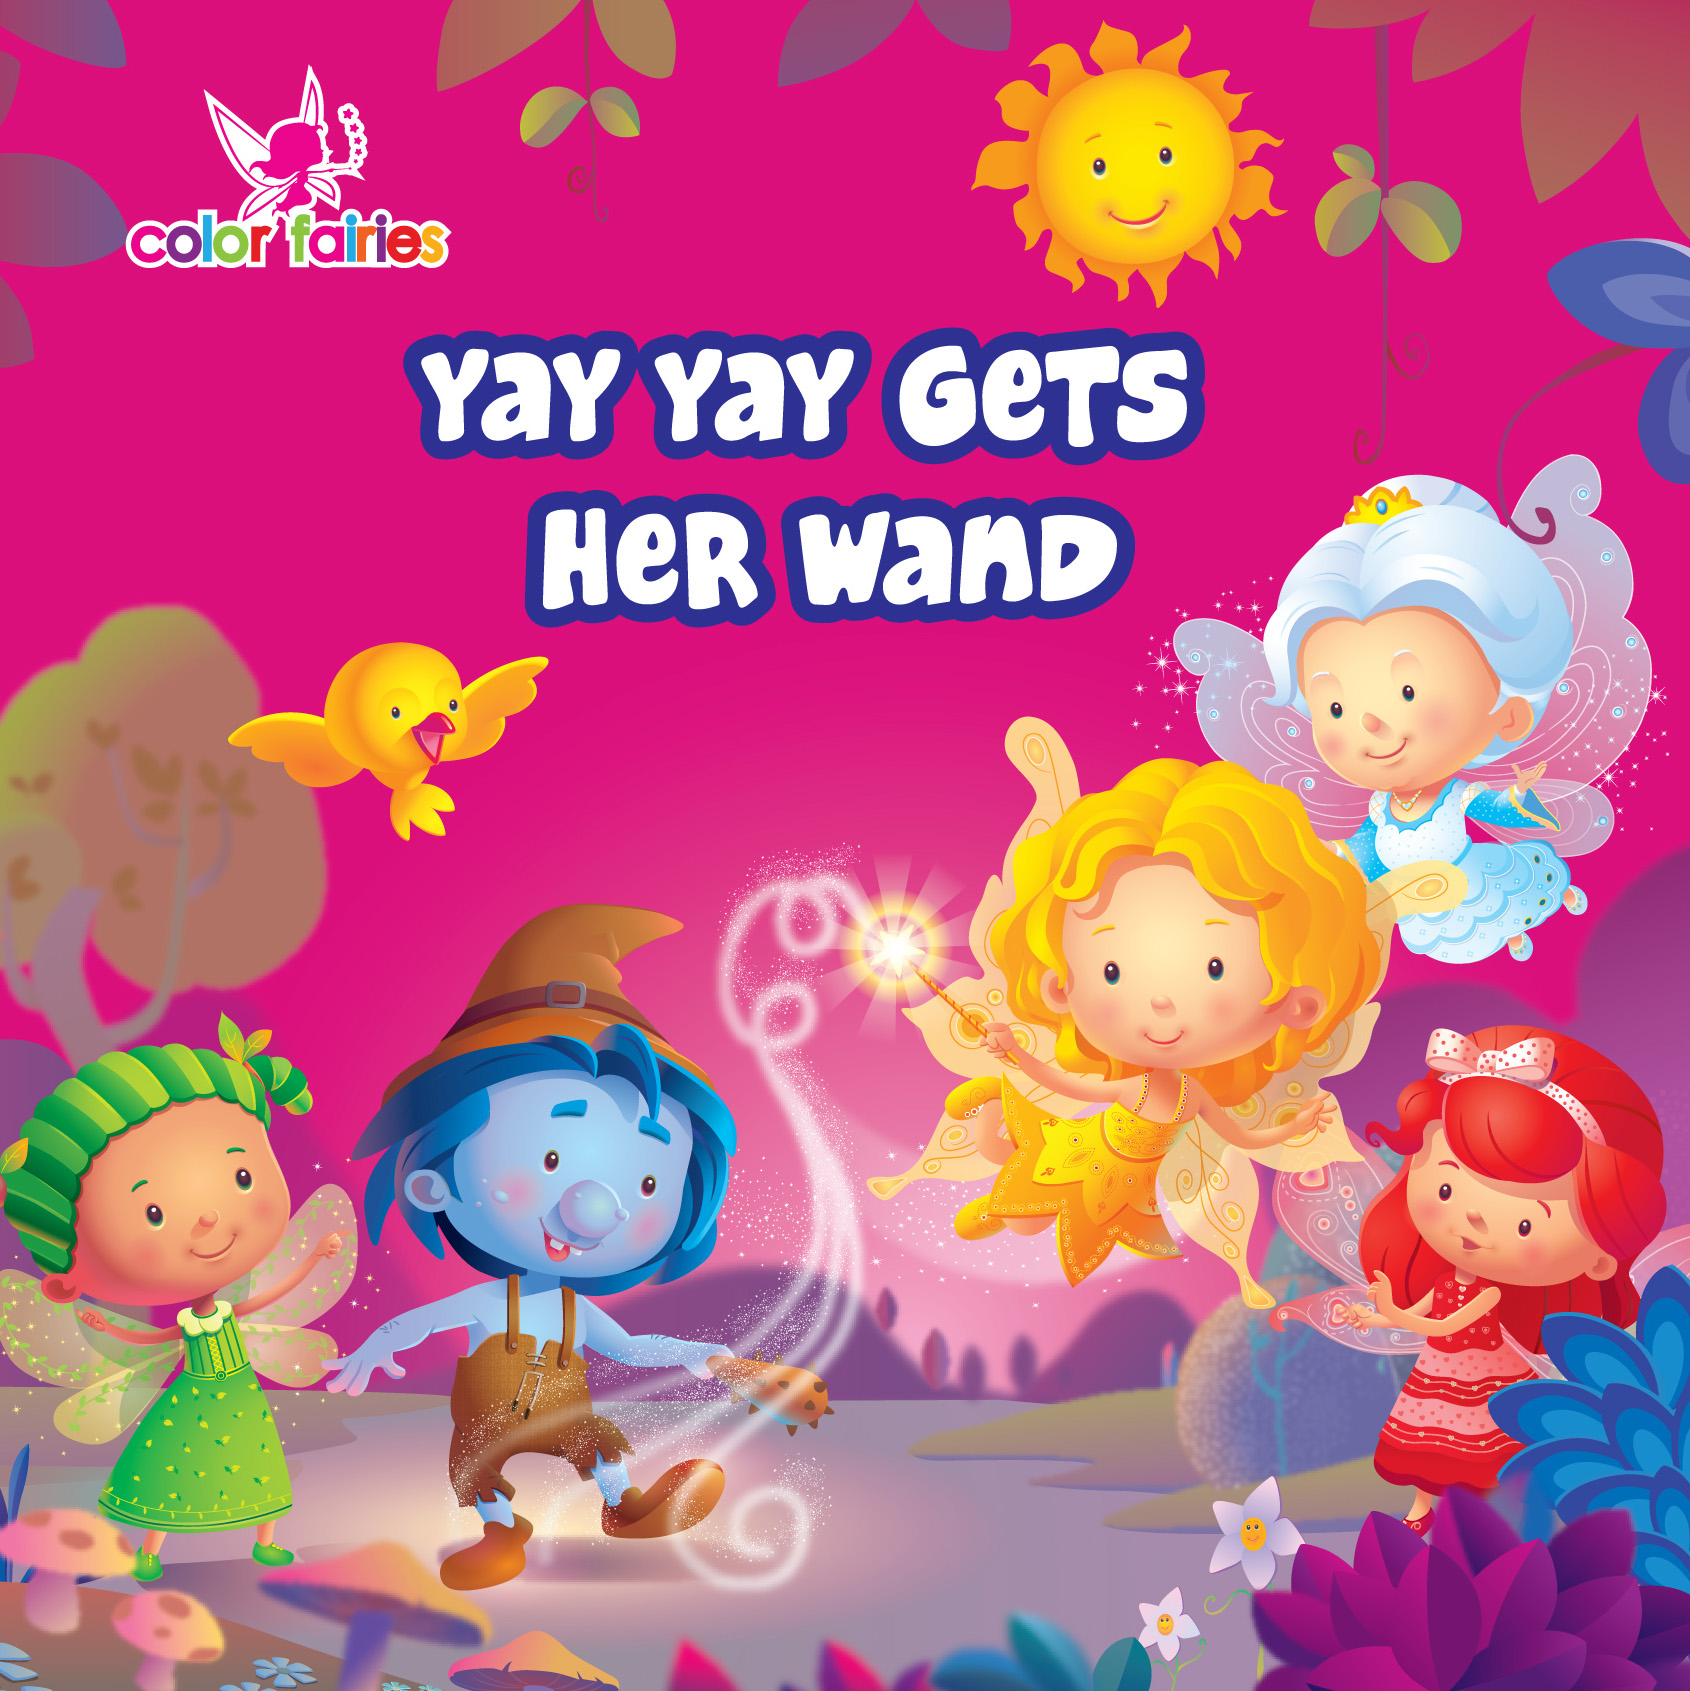 Color Fairies - Yay Yay Gets Her Wand